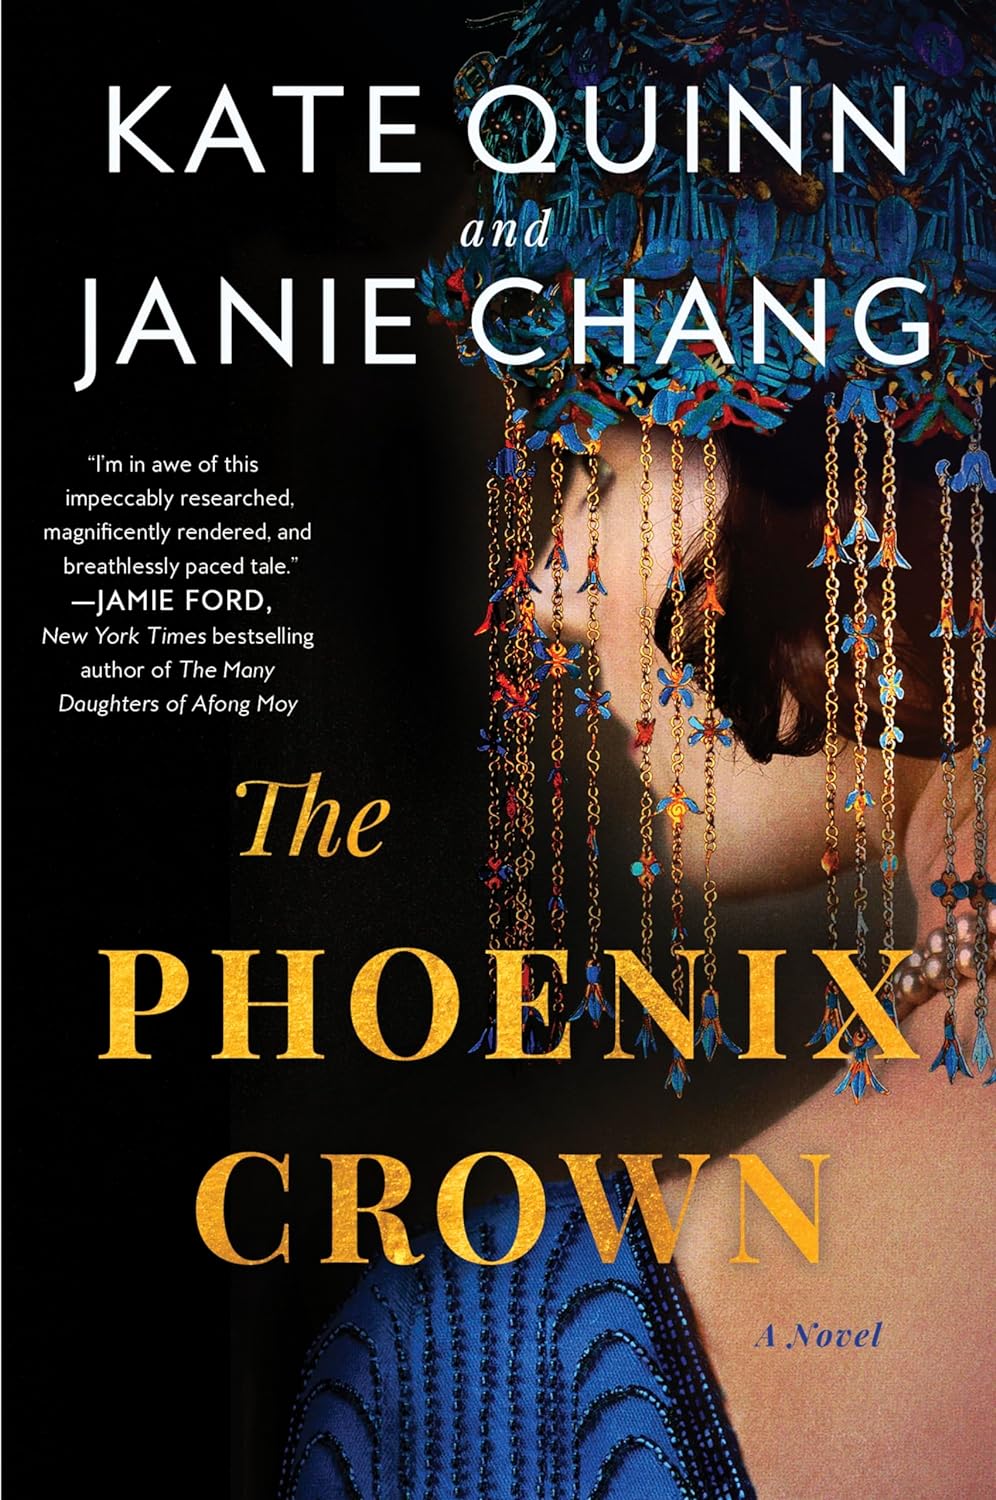 The Phoenix Crown by Kate Quinn and Janie Chang book cover.